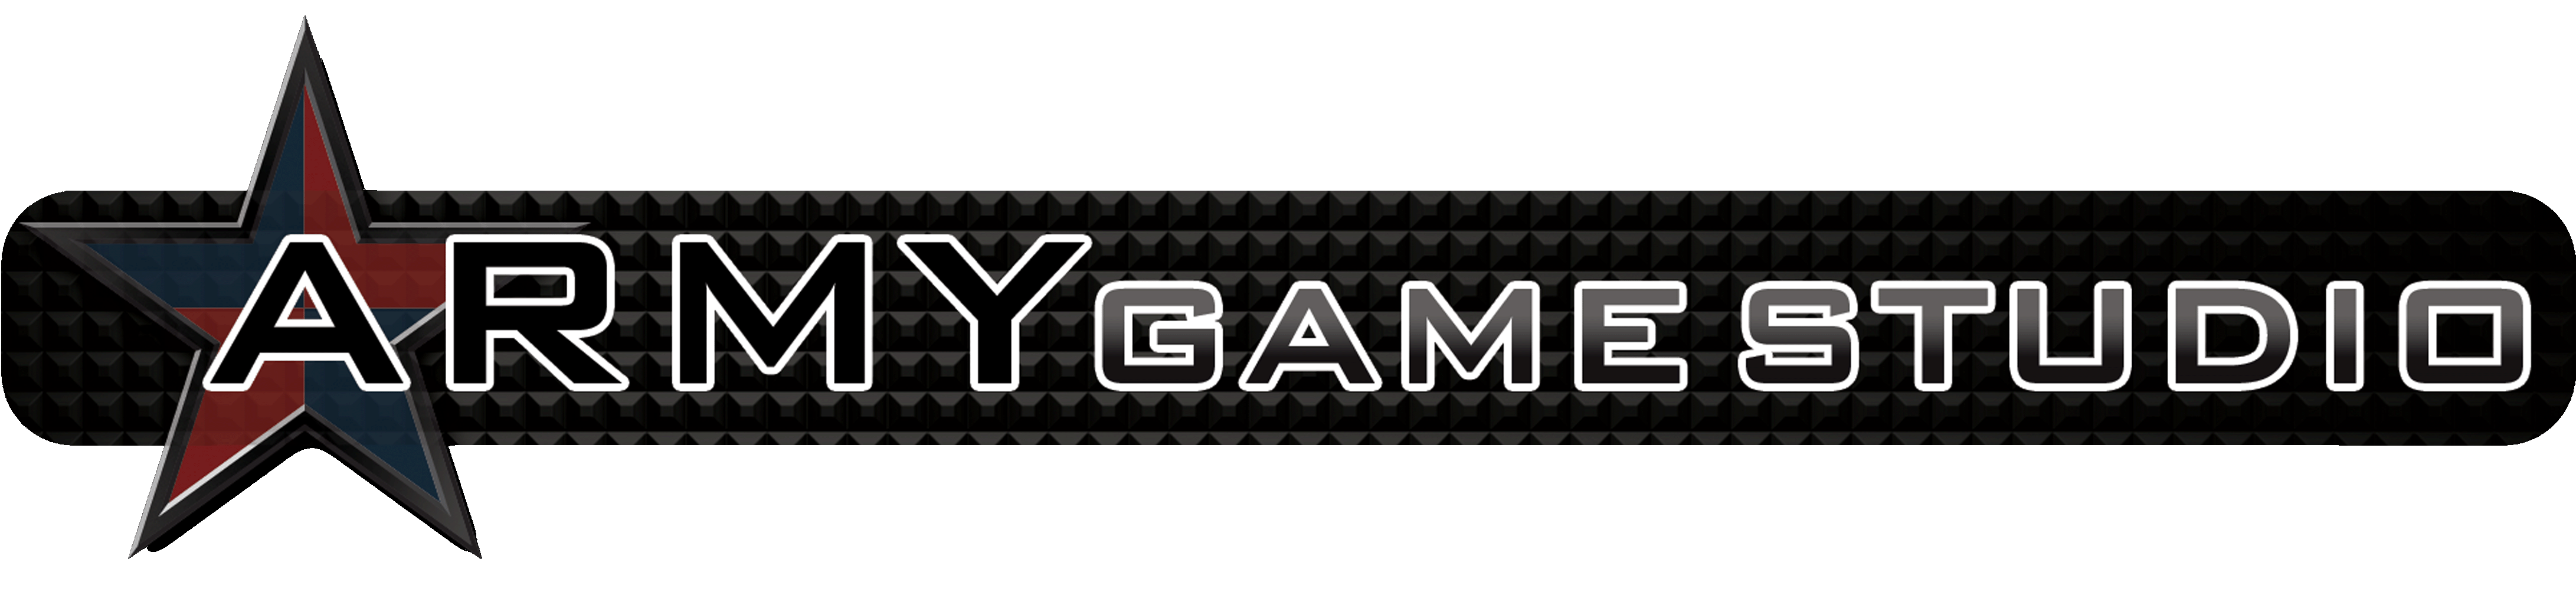 Army Game Studio Support